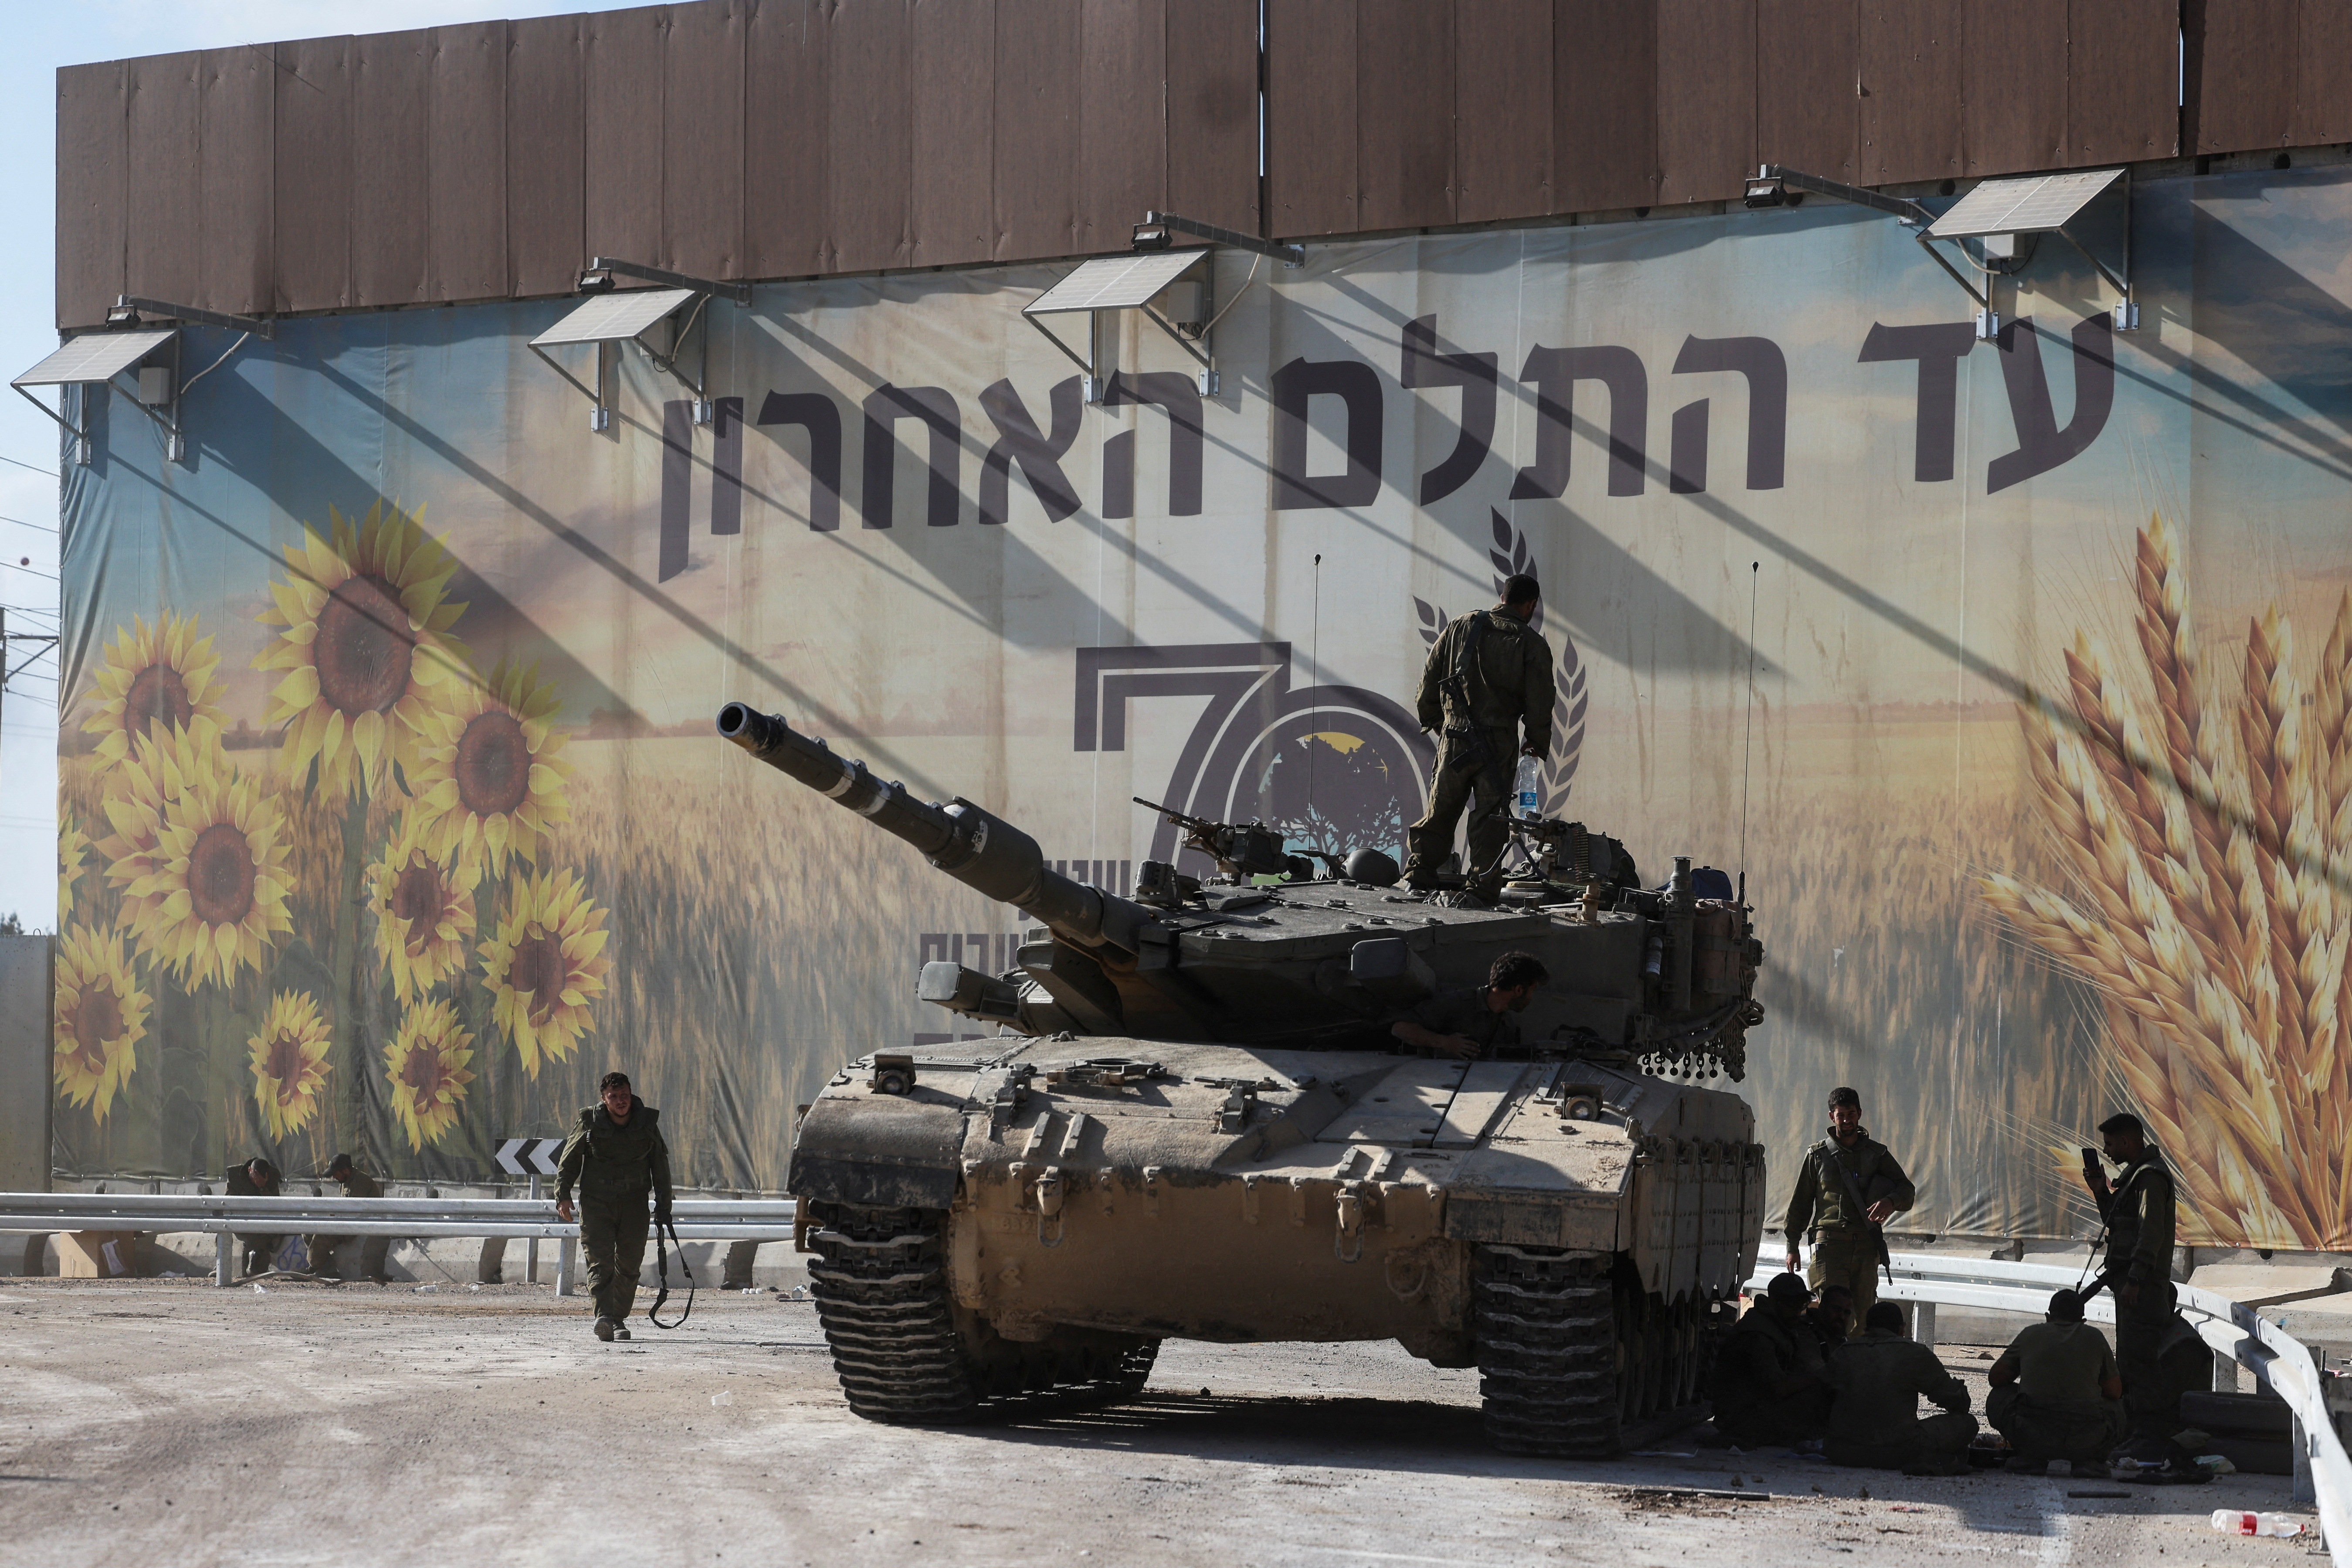 Israeli soldiers gather on and around a tank near Israel's border with the Gaza Strip, in southern Israel